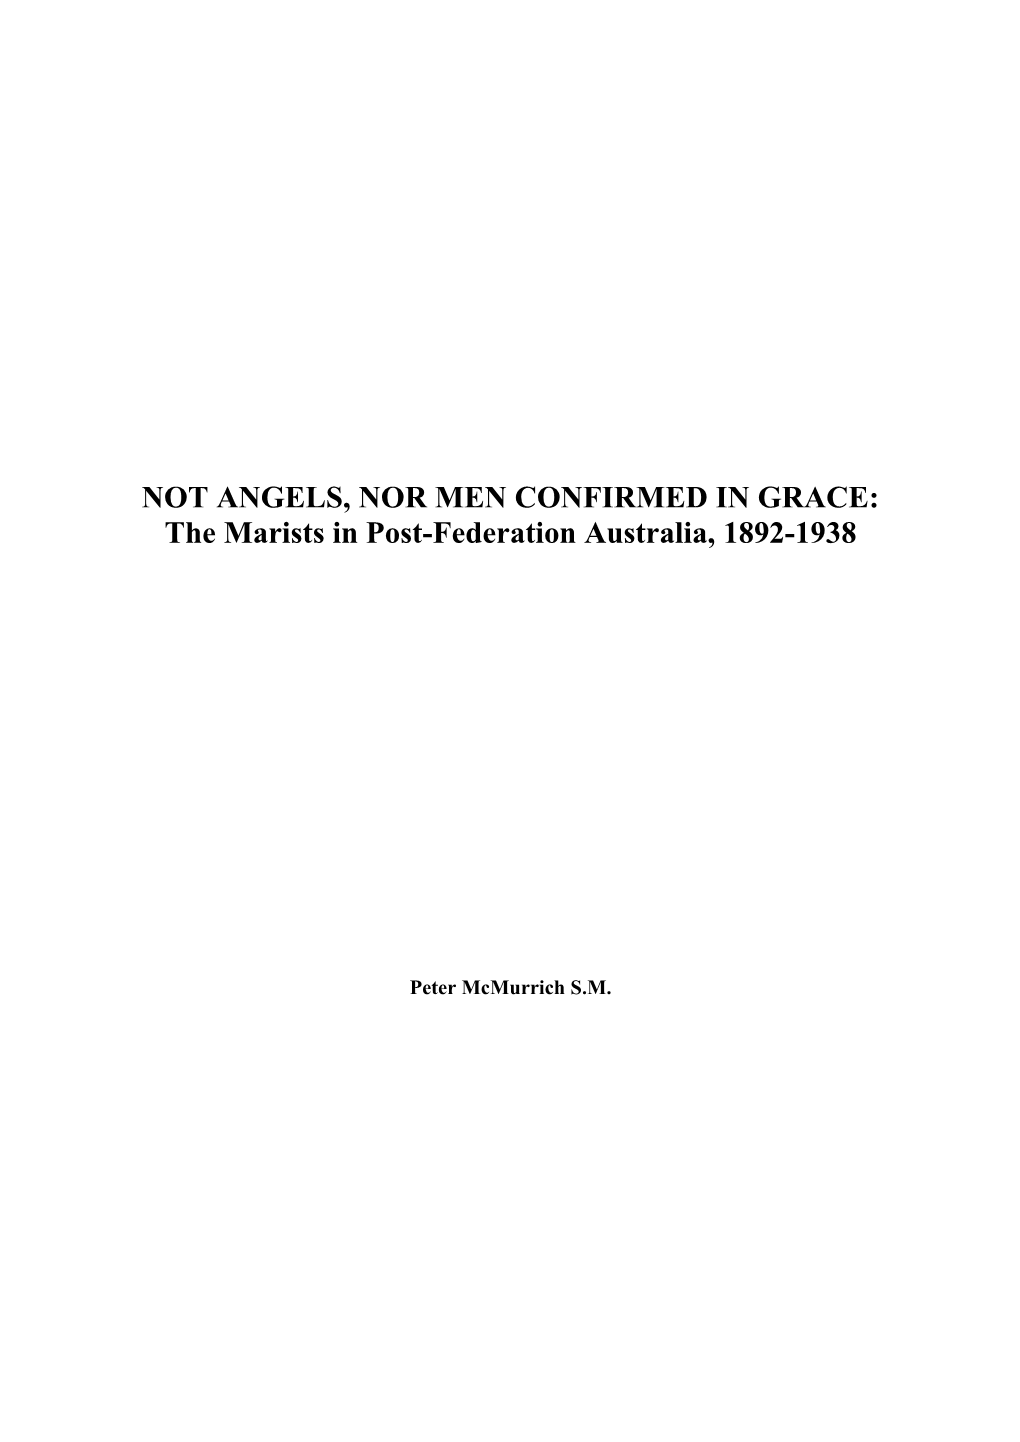 The Marists in Post-Federation Australia, 1892-1938